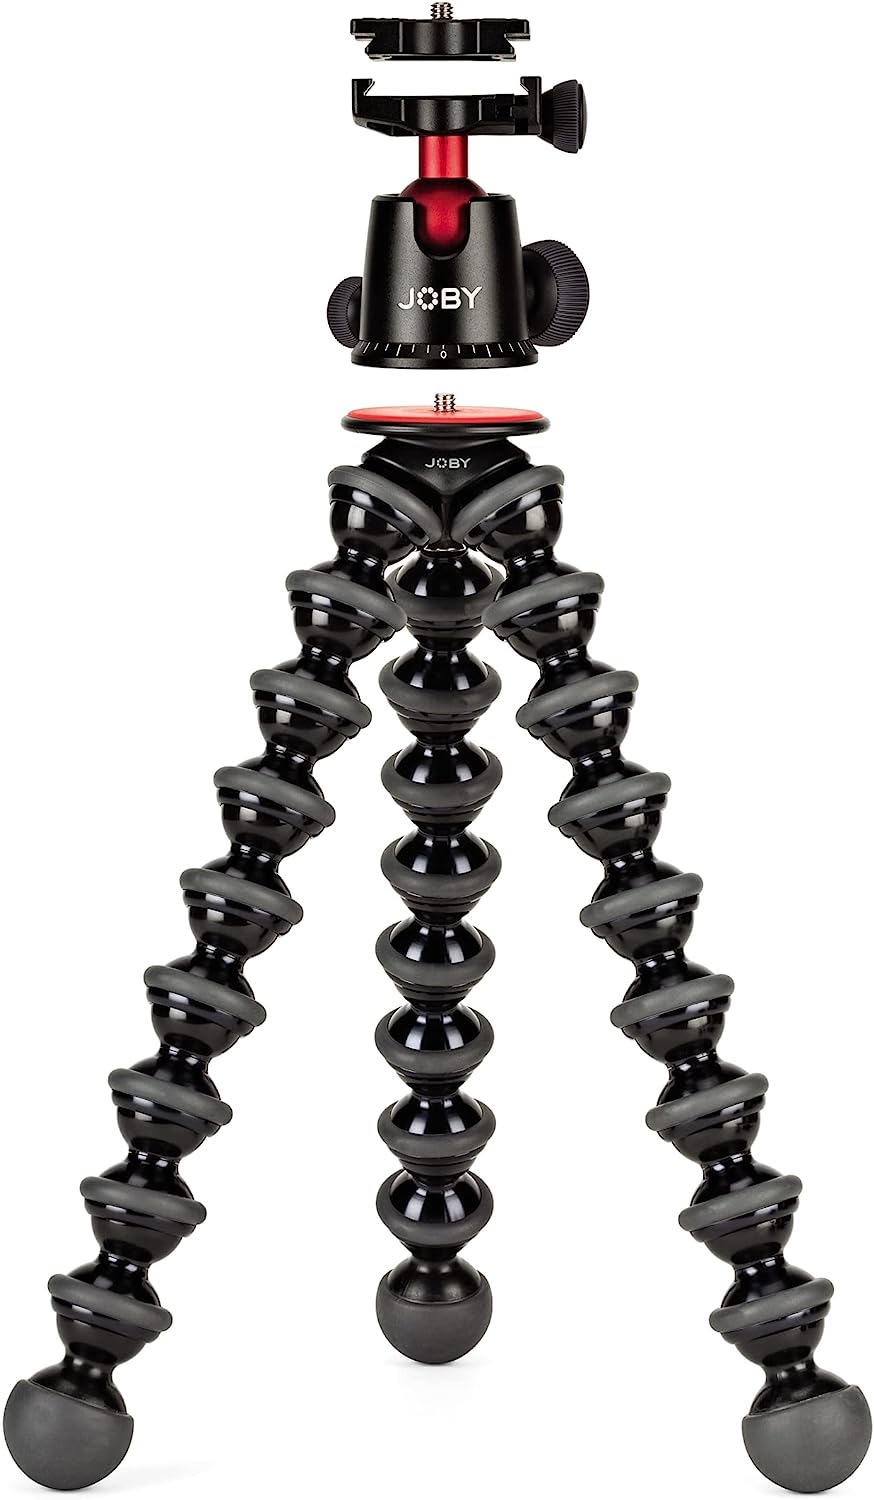 JOBY GorillaPod 5K Kit, Flexible Professional Tripod with BallHead for DSLR and CSC/Mirrorless Camera Up to 5 kg Payload